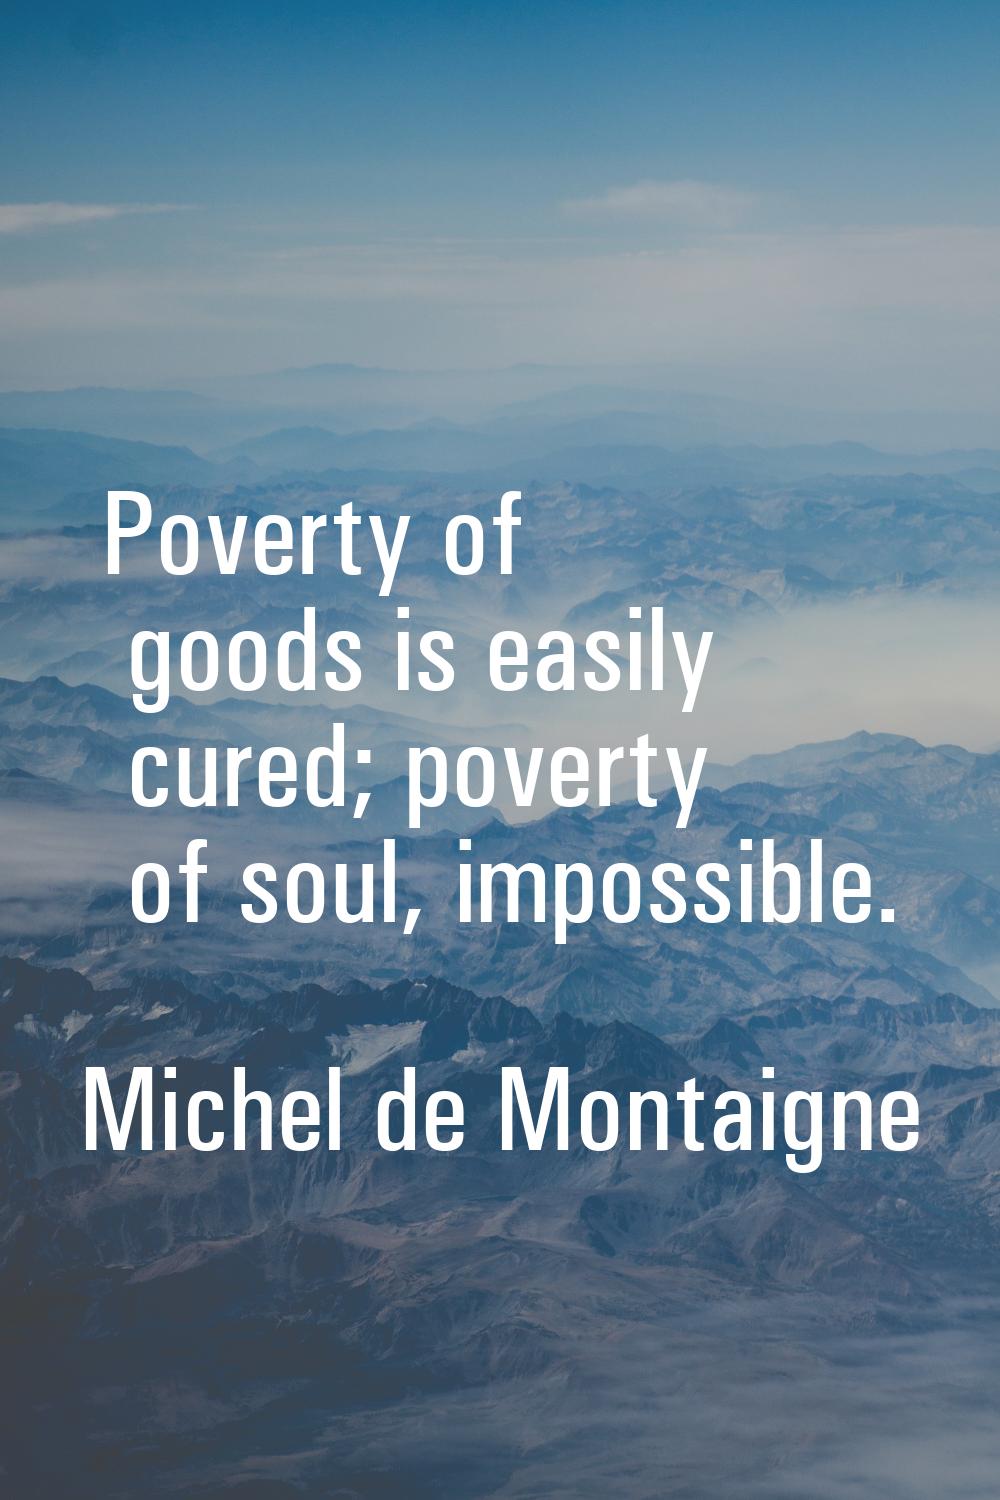 Poverty of goods is easily cured; poverty of soul, impossible.